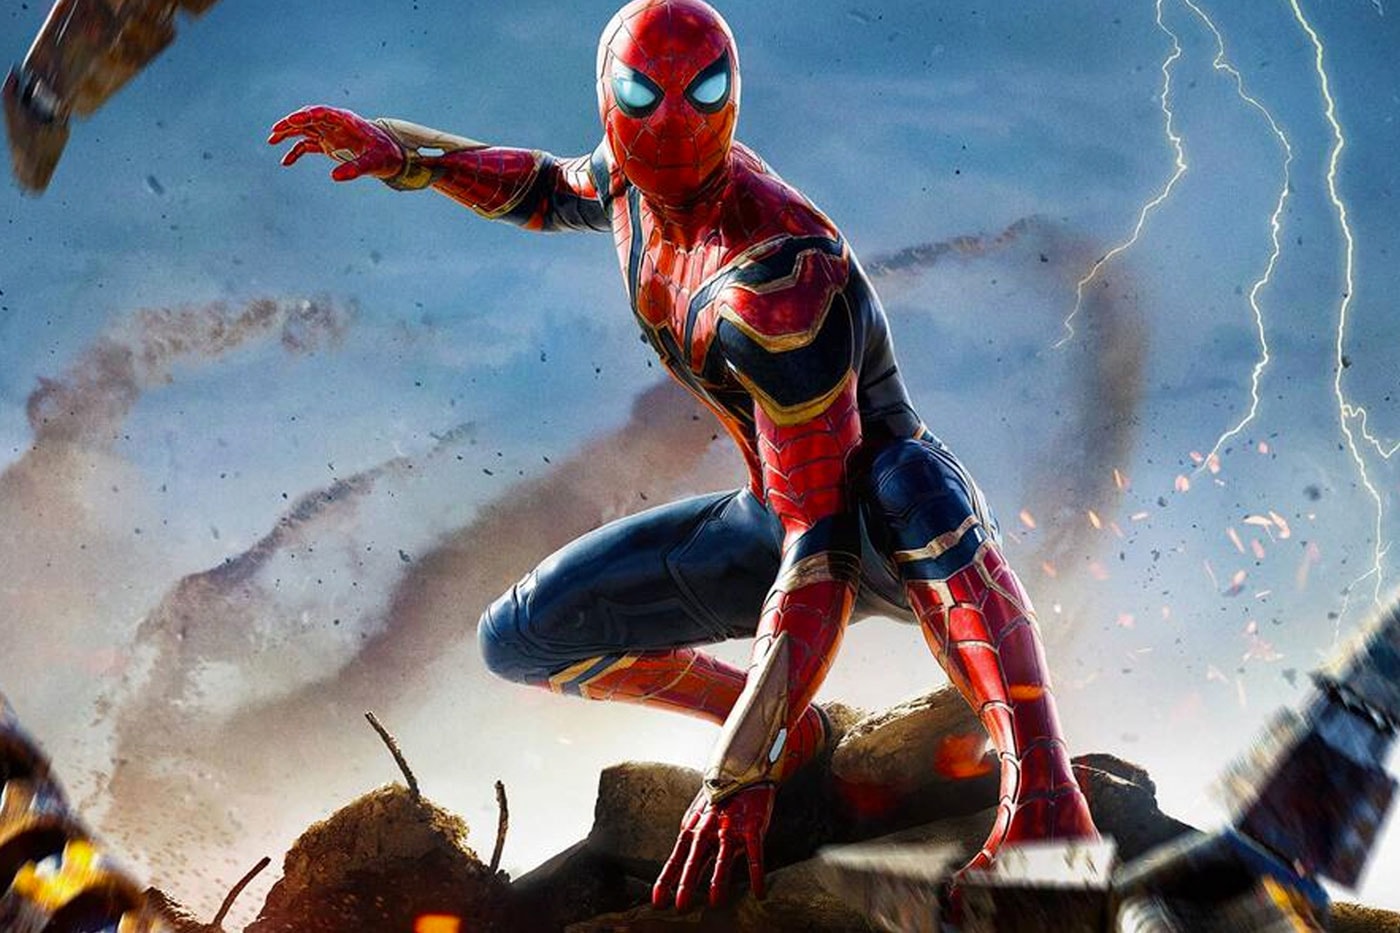 'Spider-Man: No Way Home' Cast Reveals They They Kept Spoilers a Secret for Years zendaya tom holland tobey maguire andrew garfield mcu marvel cinematic universe kevin feige 